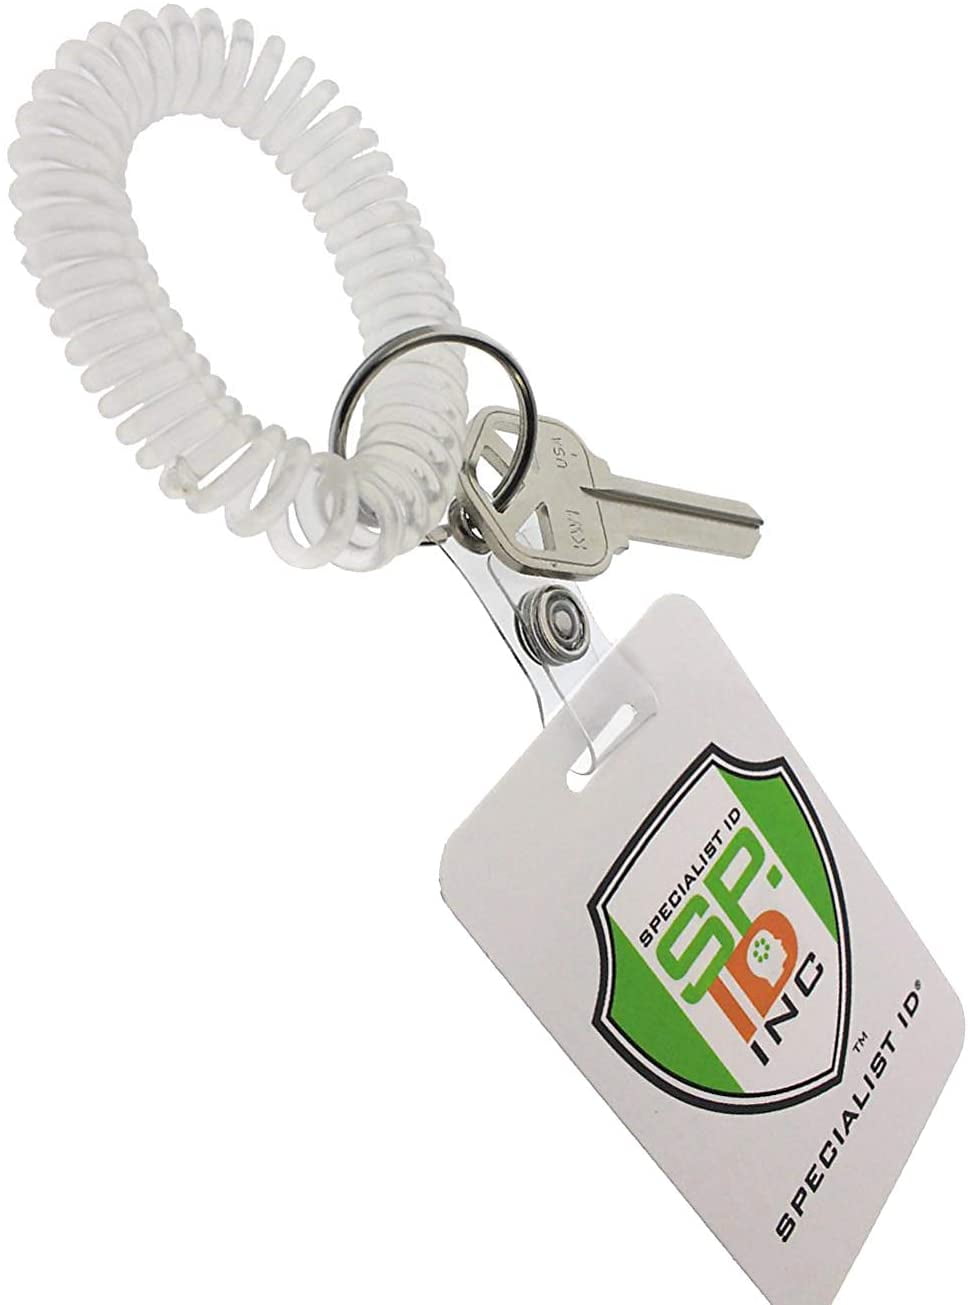 New 25 x Clear ID Card Holder with Keyring for Fuel Card,Loyality Card etc 